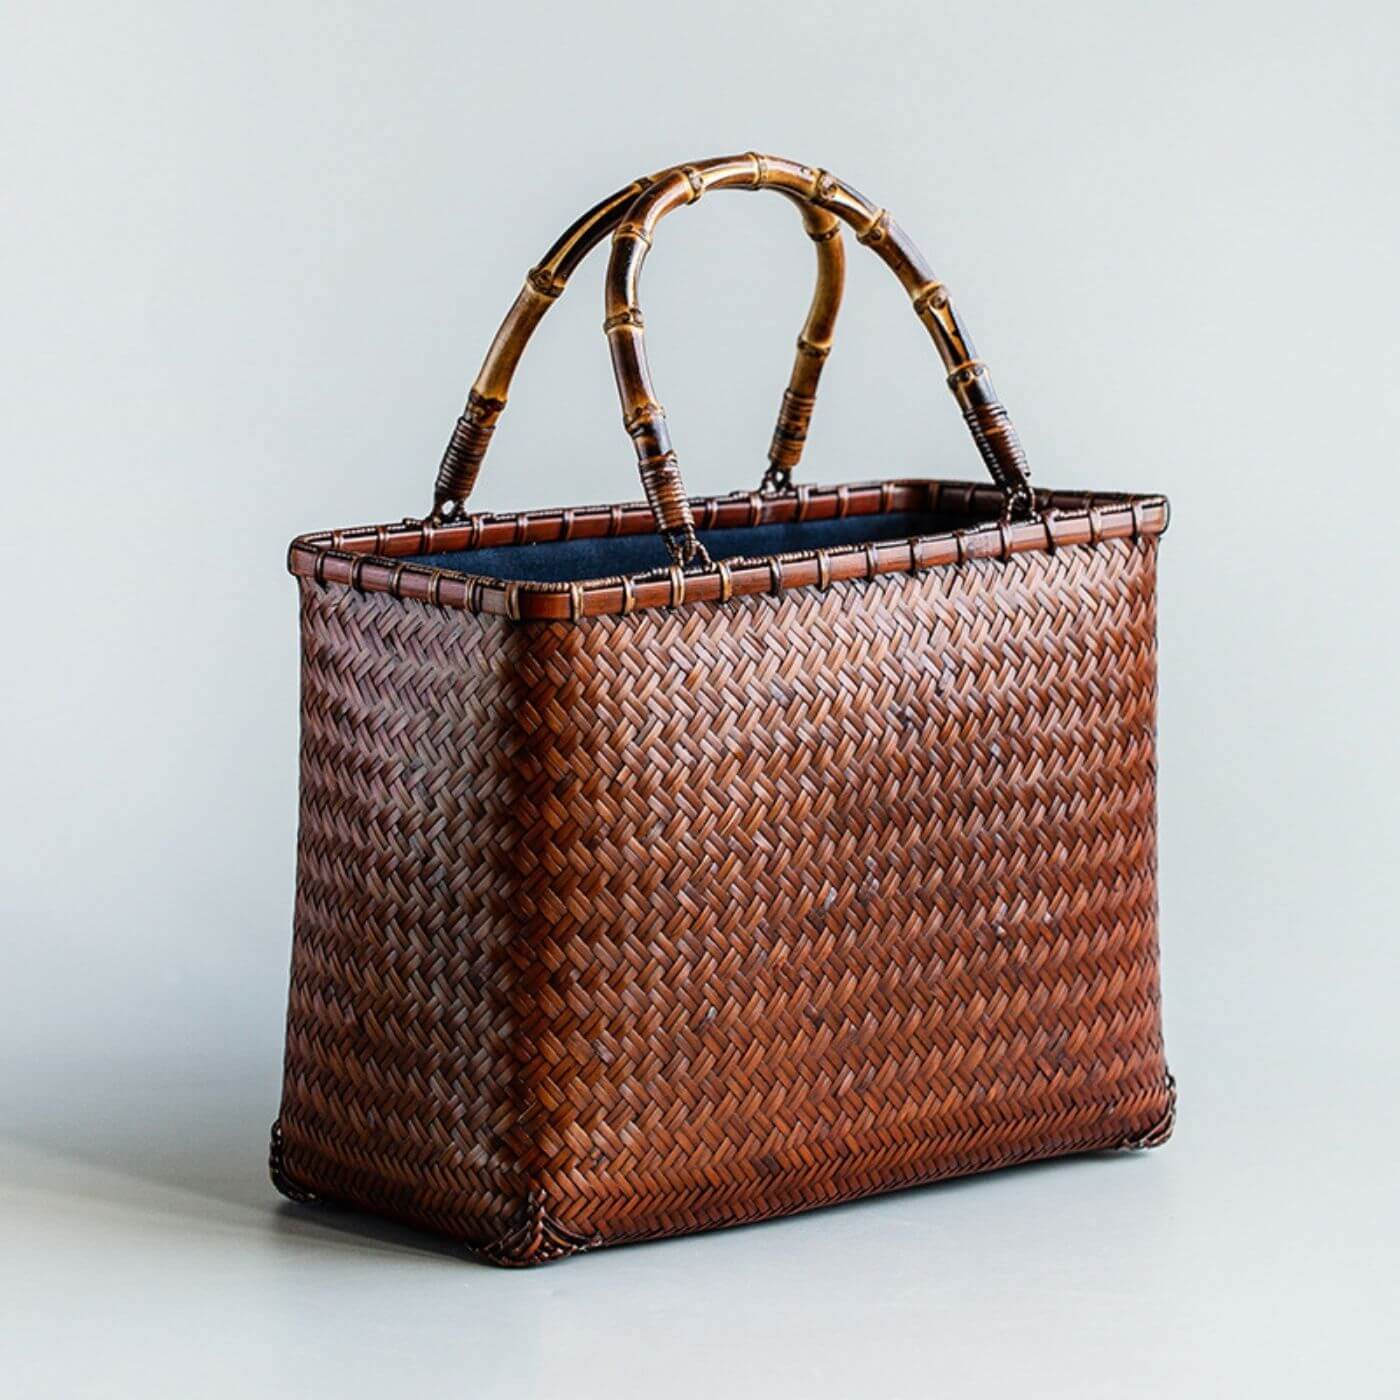 Chinese Bamboo-woven Handmade Handbag100% handmade Chinese bamboo woven bags. No matter, if you want to take it to a picnic, pick flowers, or just carry your belongings when commuting, this bag, will ensure you catch the eye.